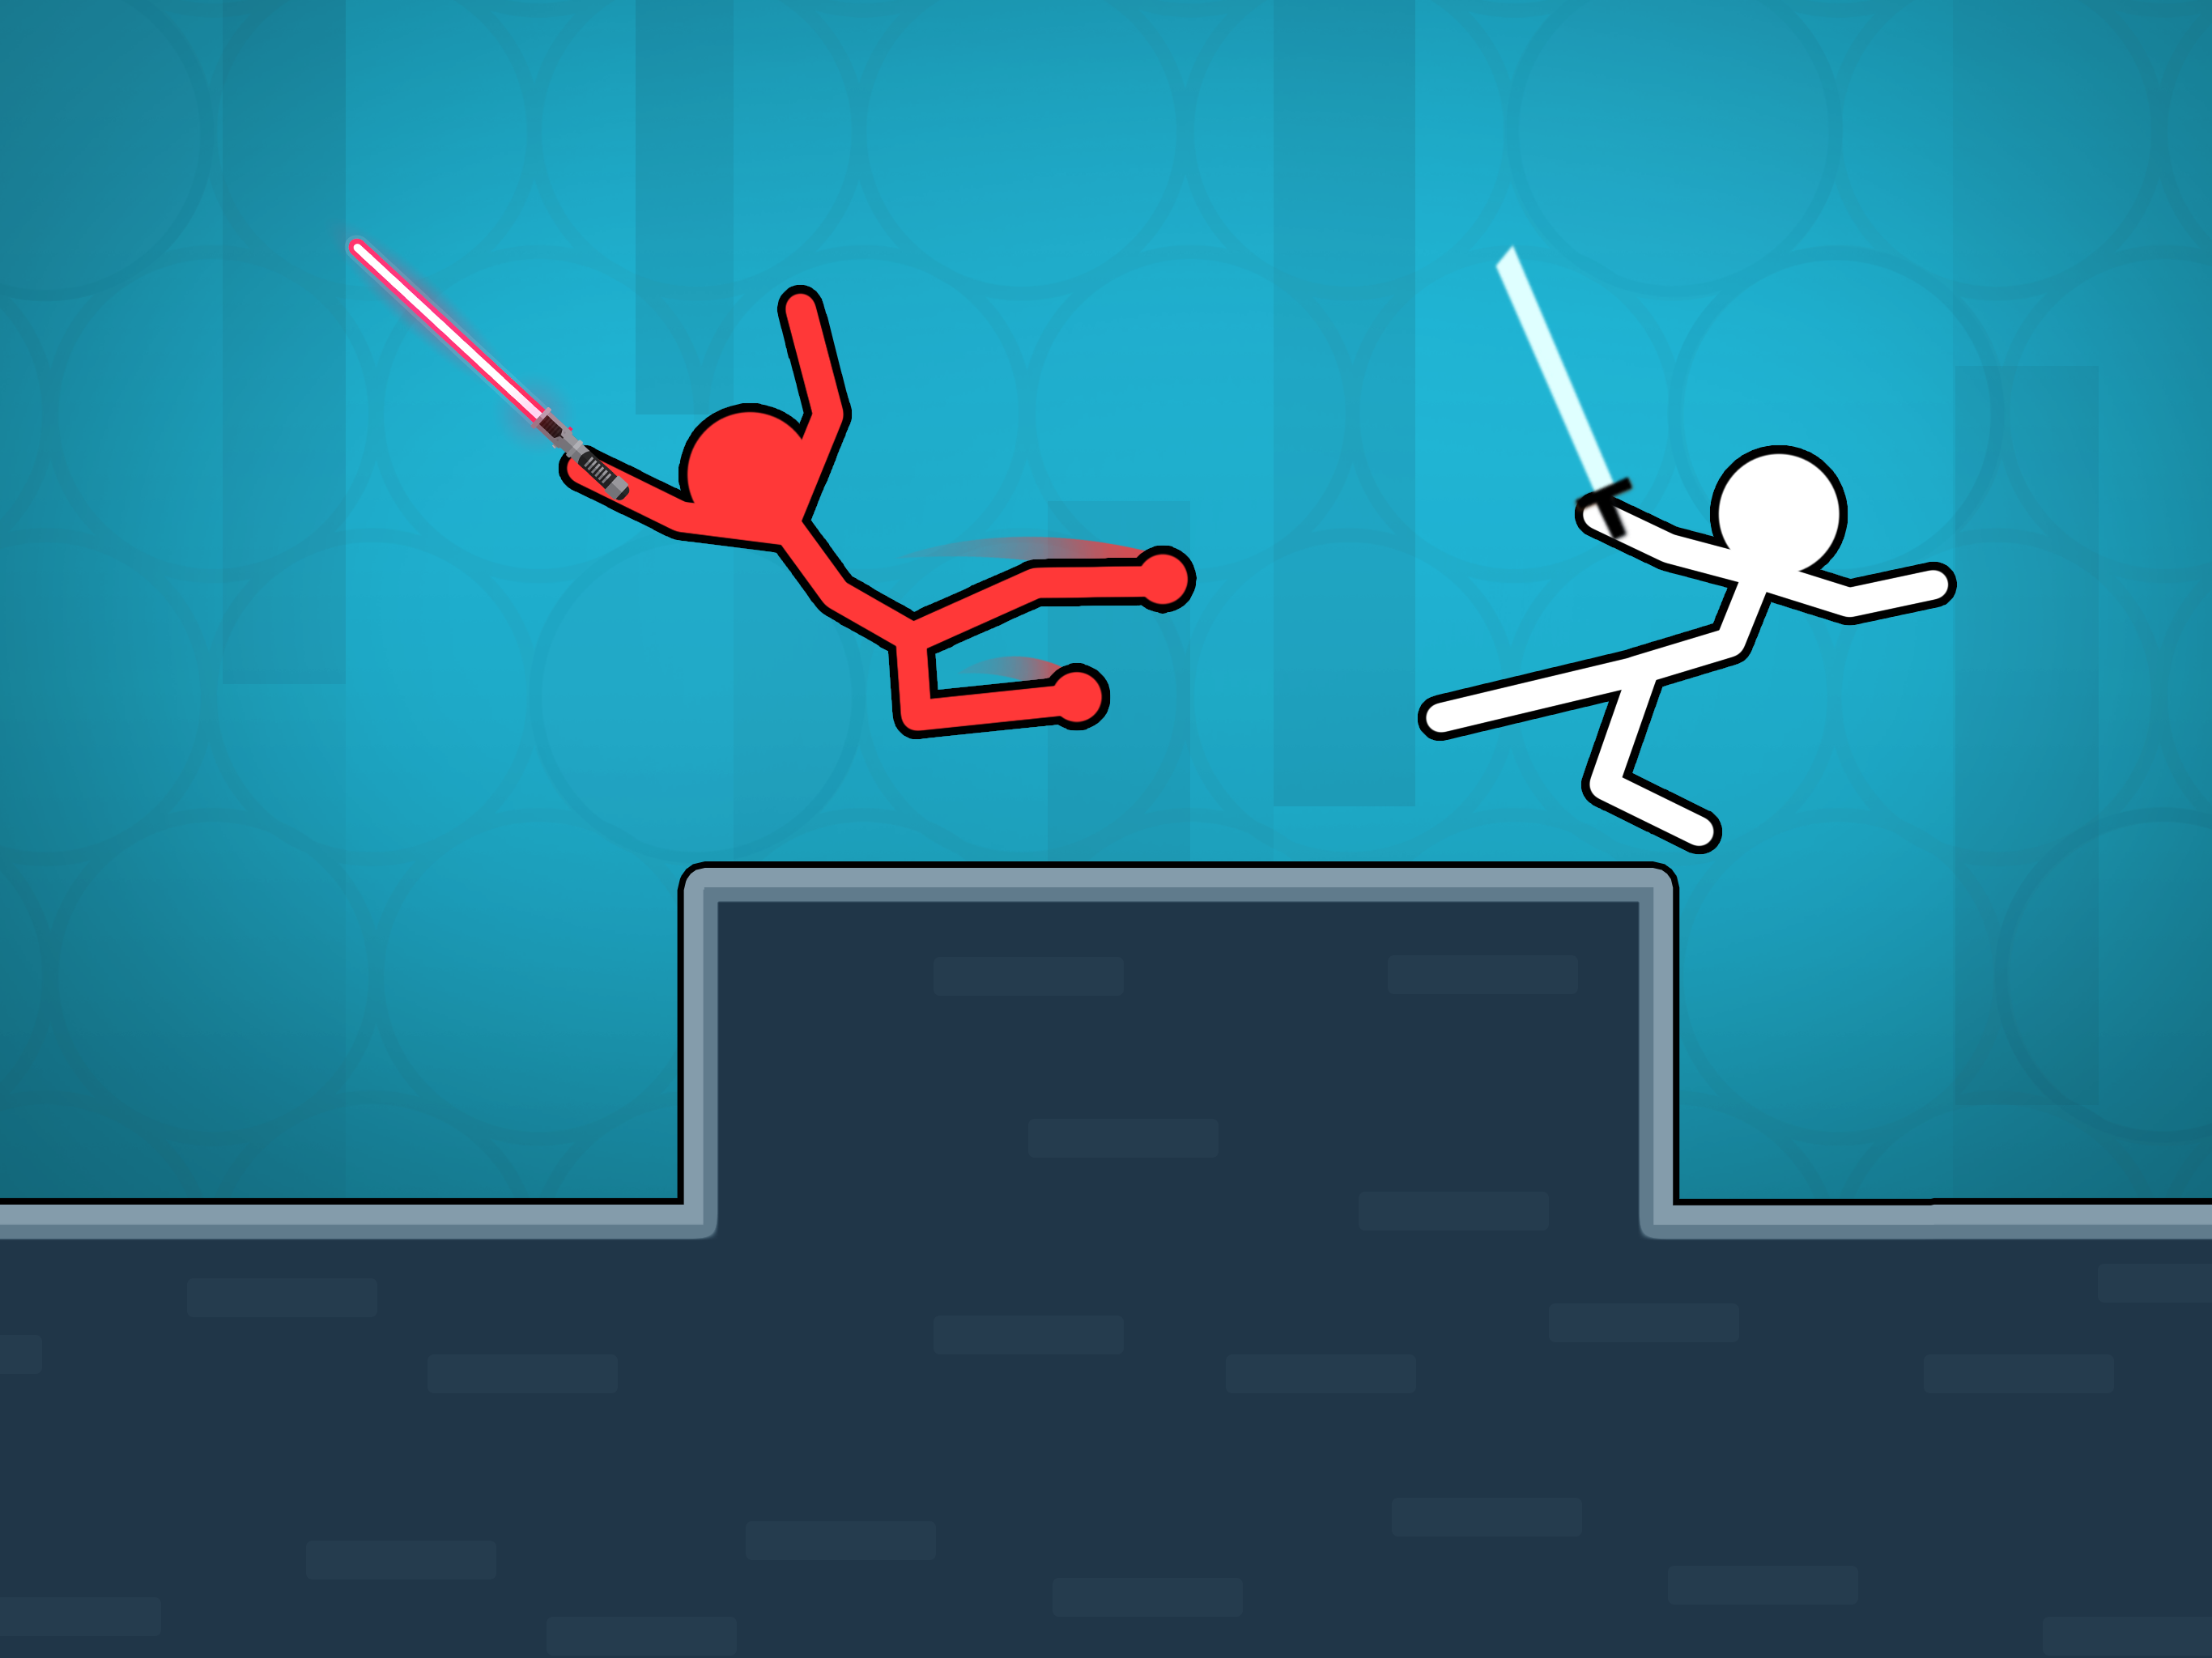 Spider Stick Fight - Supreme Stickman Fighting Game for Android